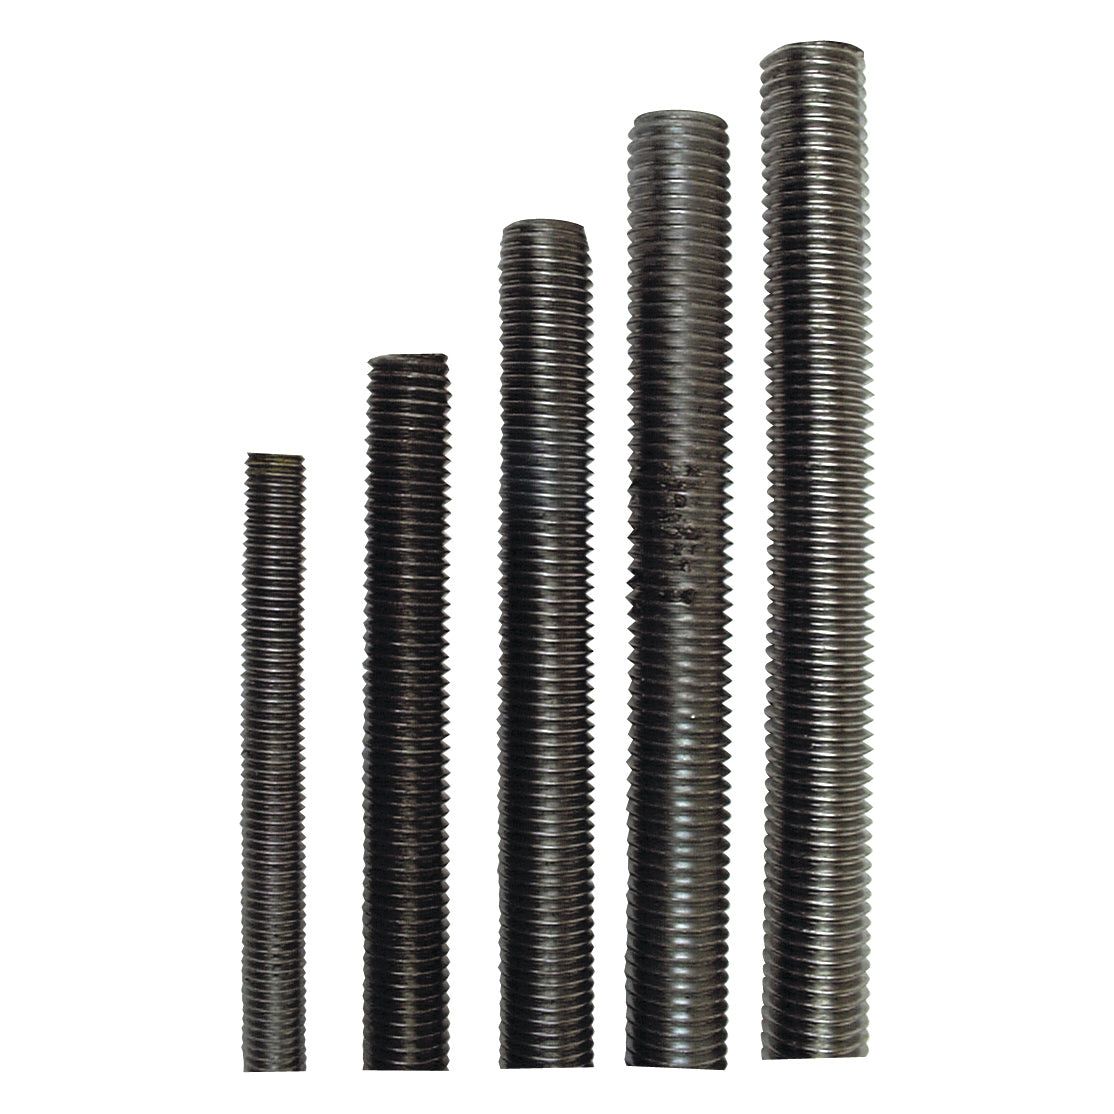 Metric Threaded Bar, Size:⌀6mm, Length: 1M, Tensile strength: 8.8.
 - S.8810 - Farming Parts